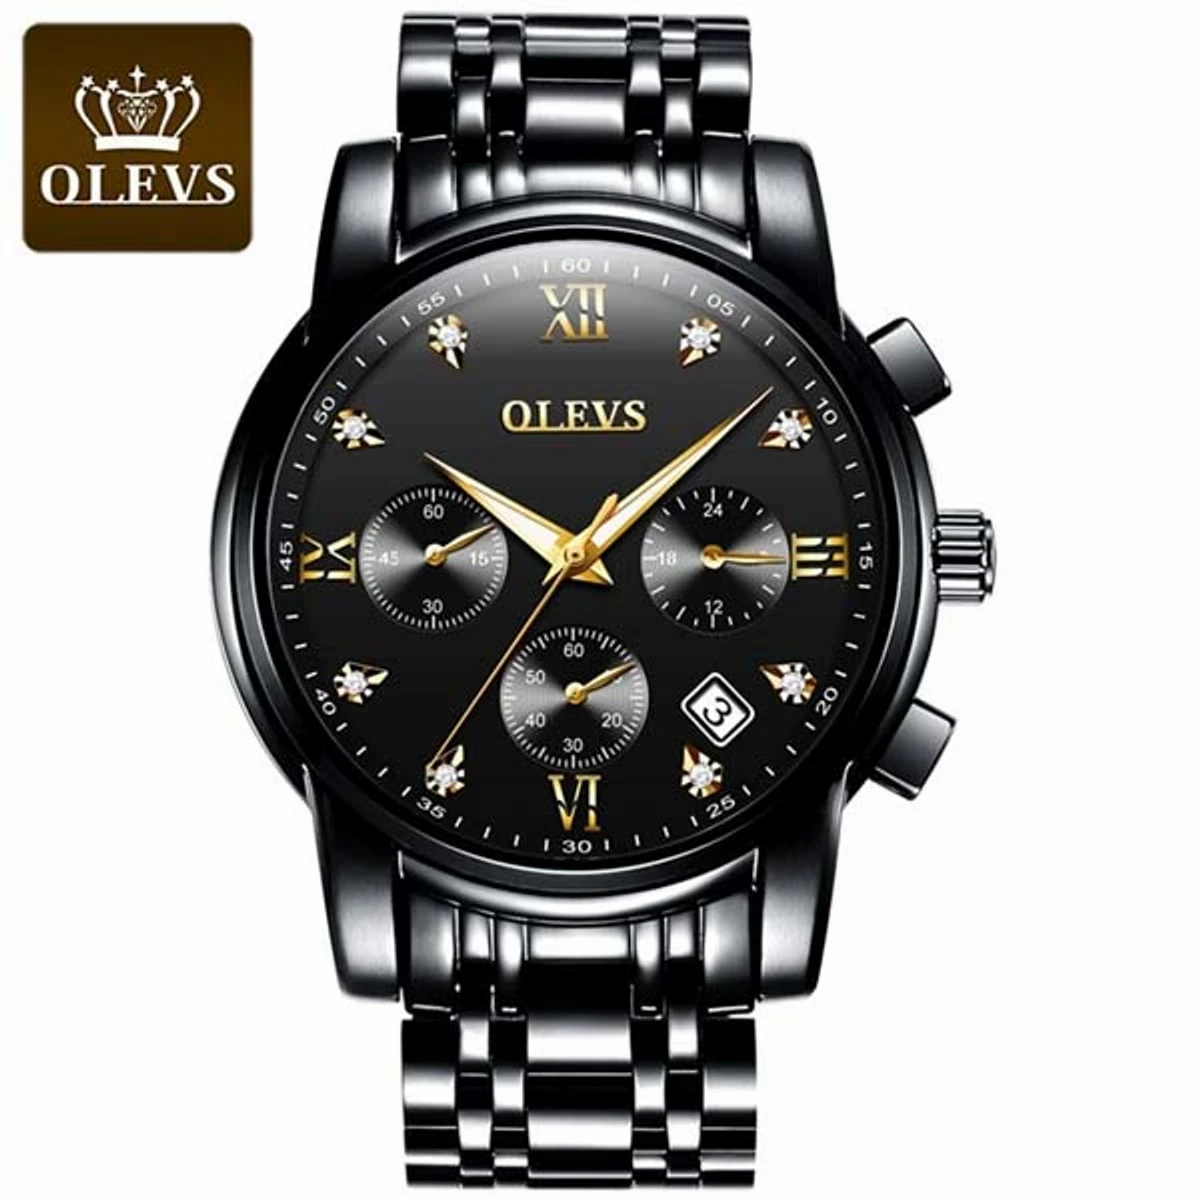 OLEVS MODEL Watch for Men Stainless Steel Watches Full BLACK COOLER WATCH - MAN WATCH